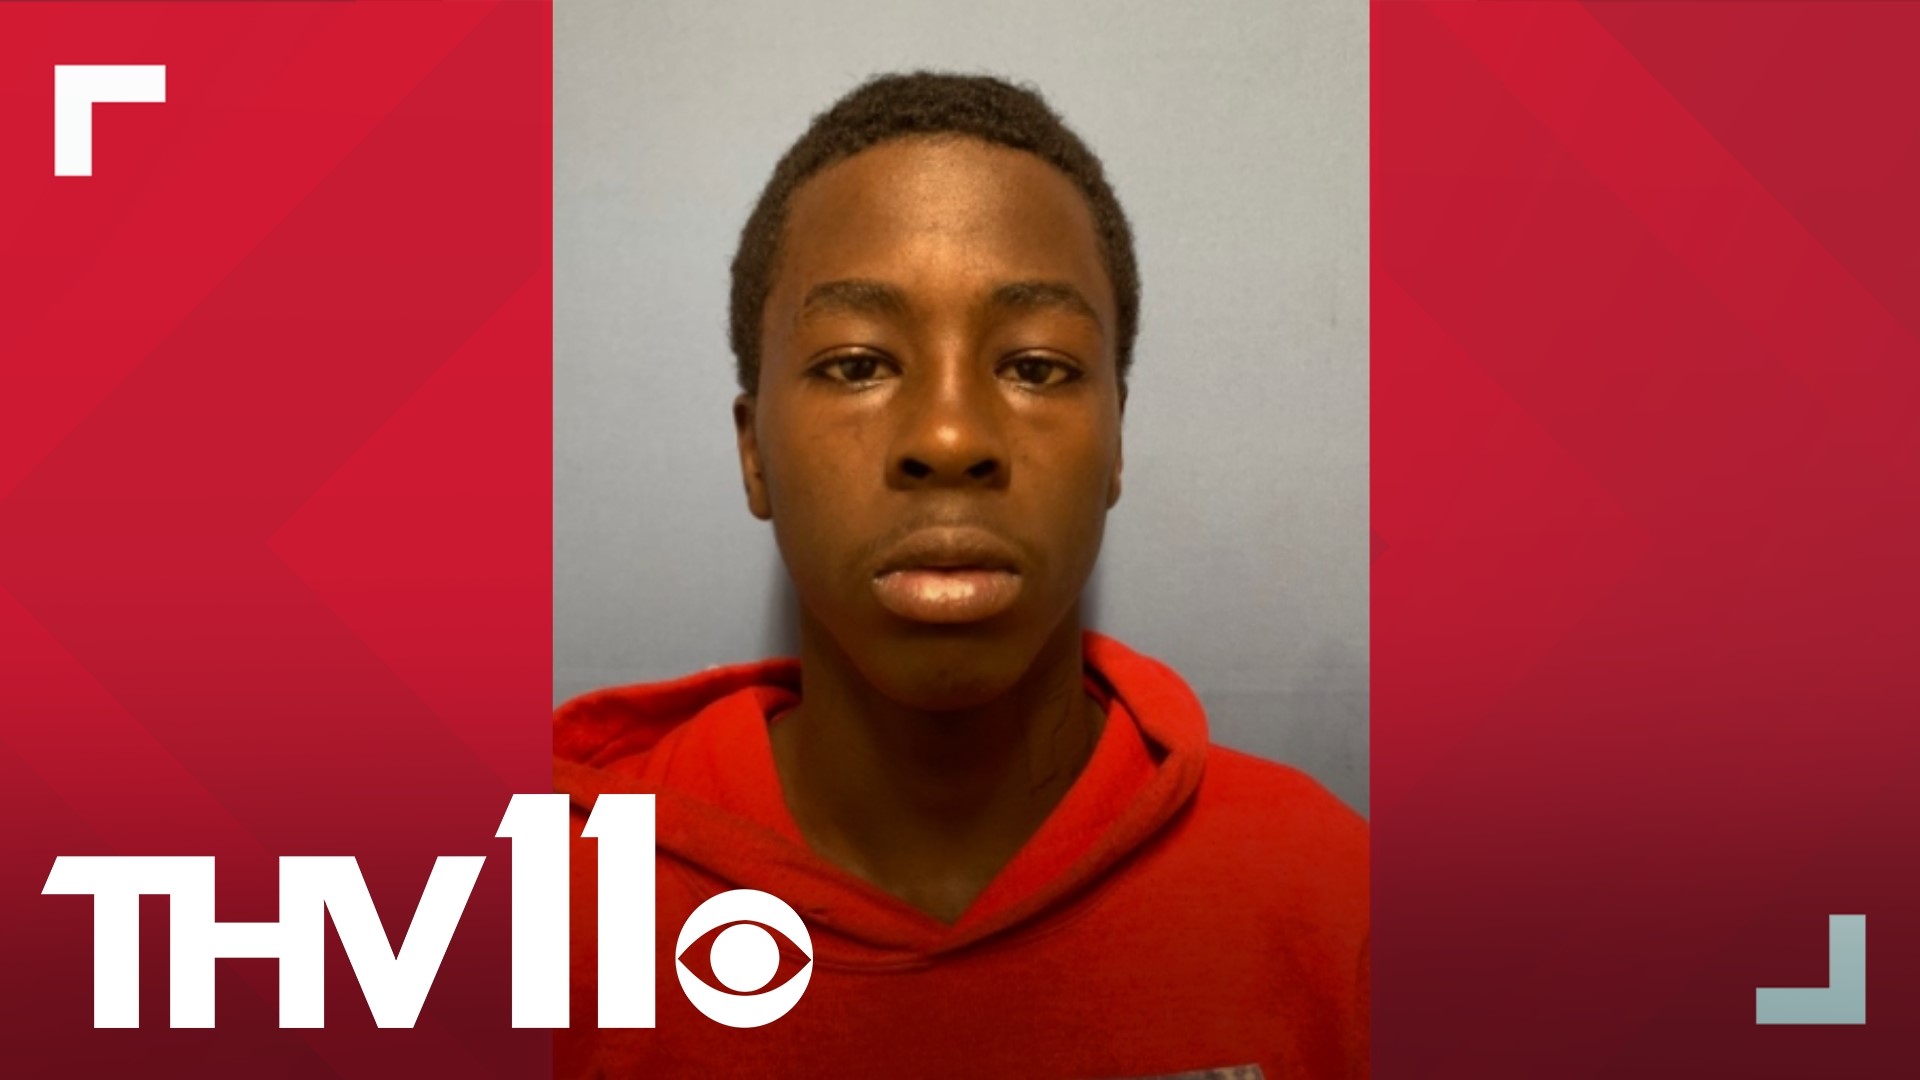 U.S. Marshals have confirmed that 15-year-old Tyler Bland, who was wanted in connection to a homicide at a Little Rock apartment, is now in custody.